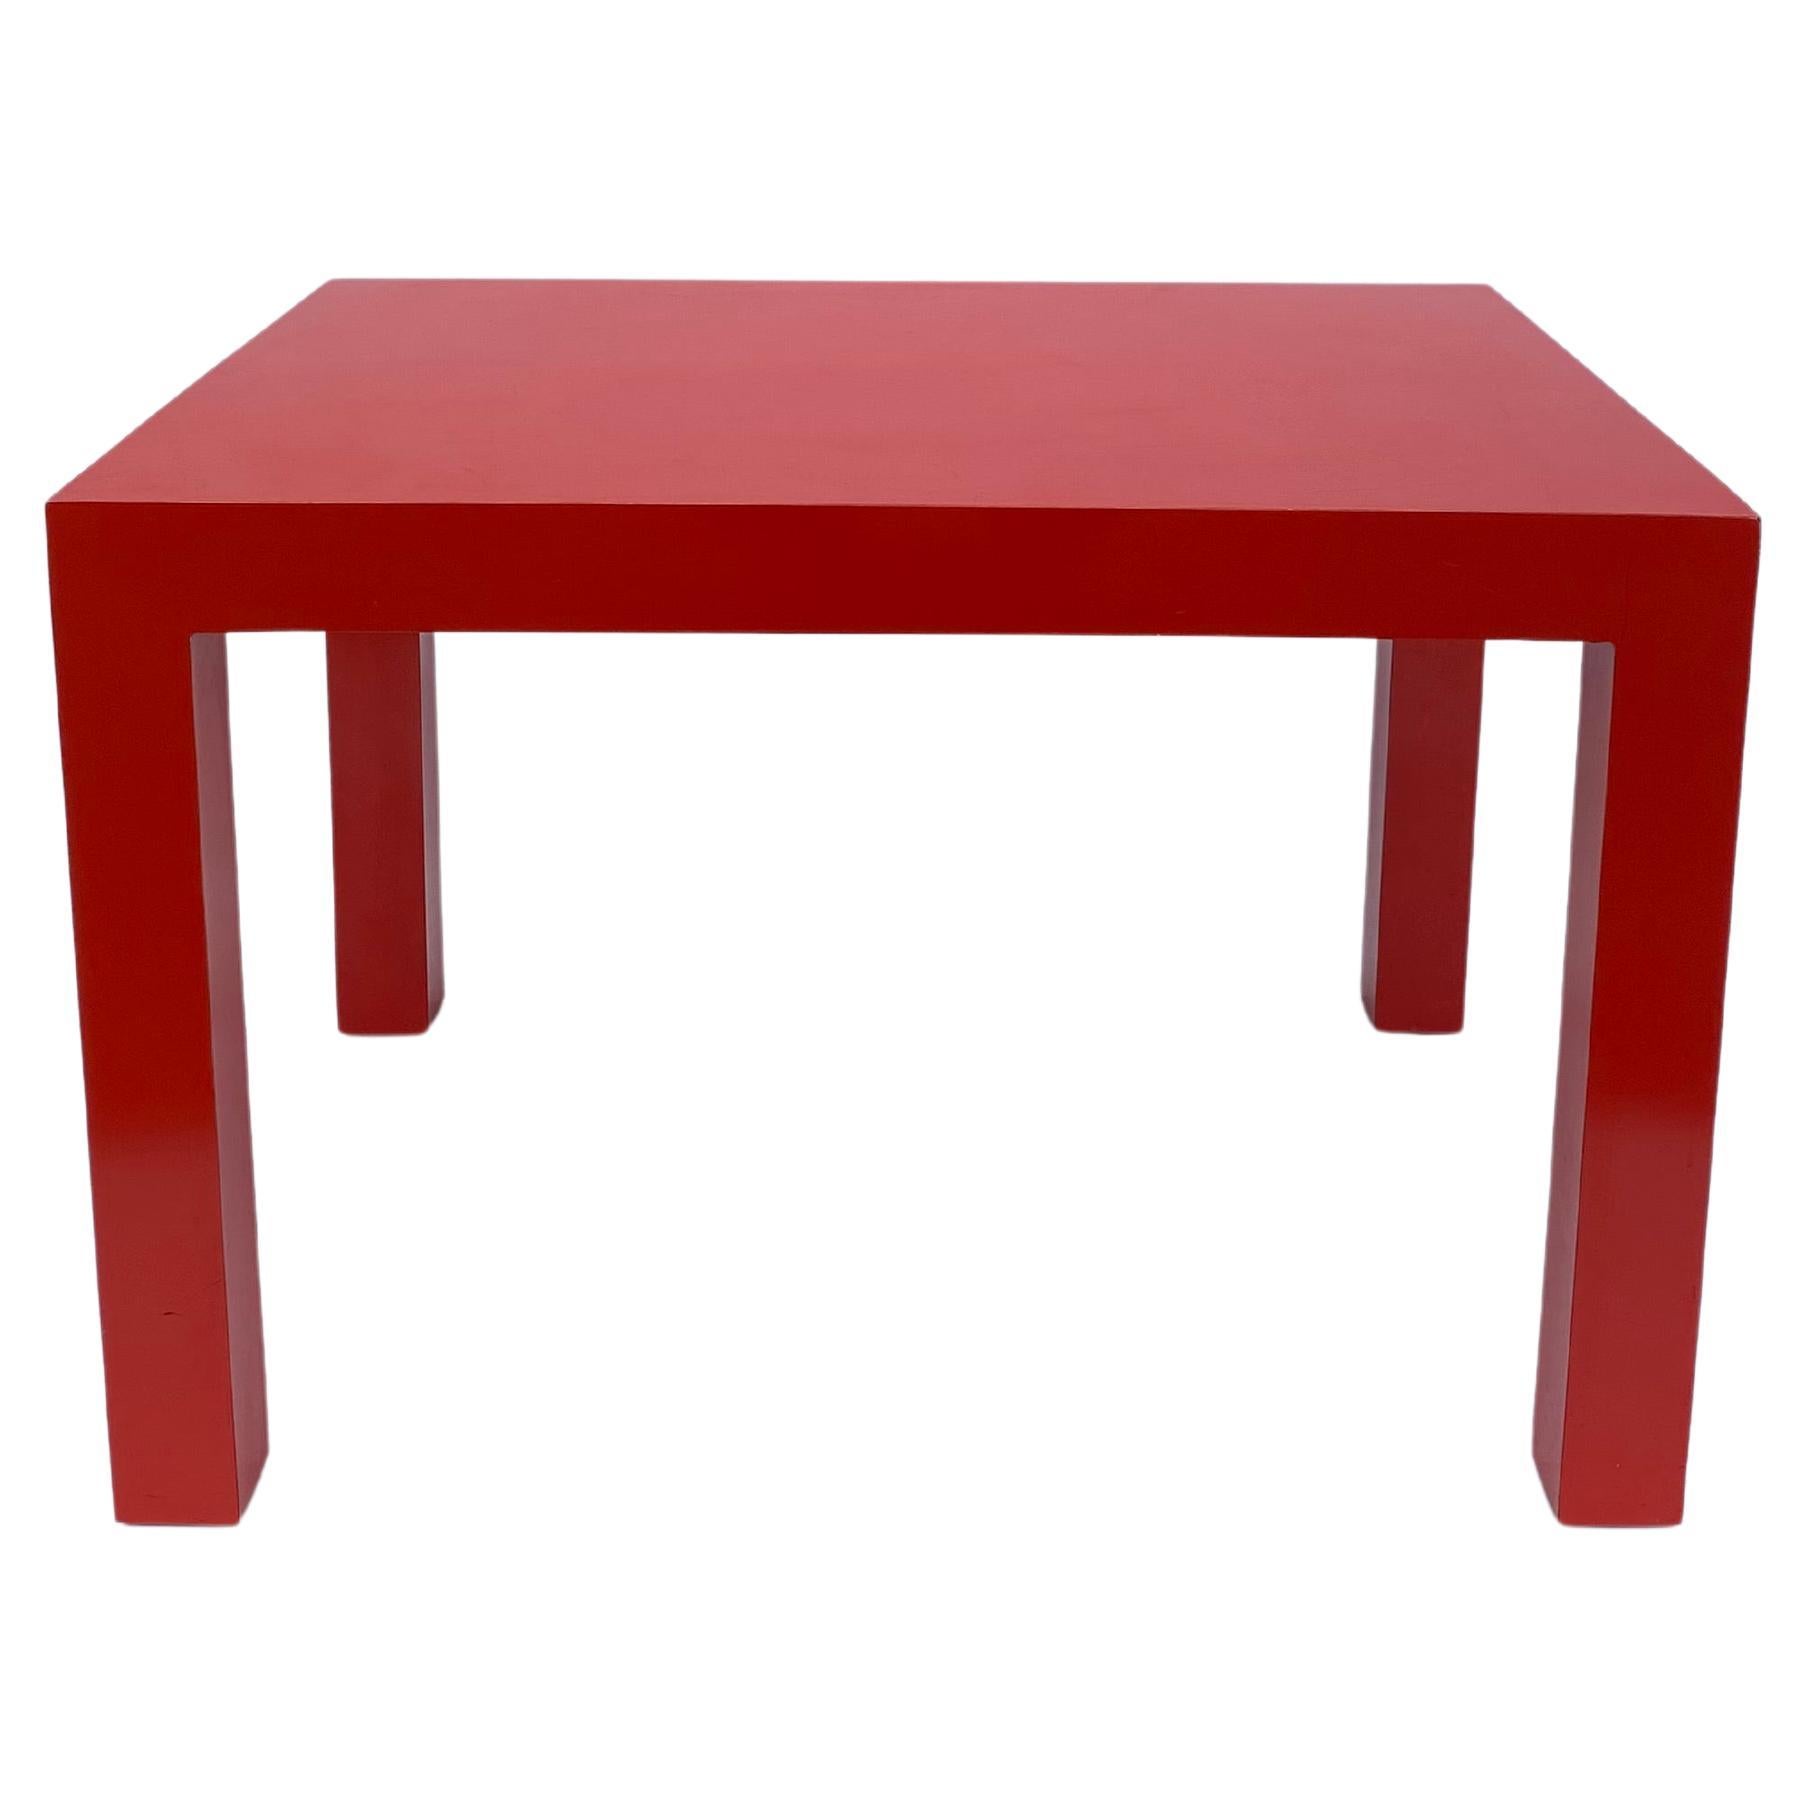 Milo Baughman for Thayer Coggin Formica Red Side Coffee Table 1960s Mid Century  For Sale